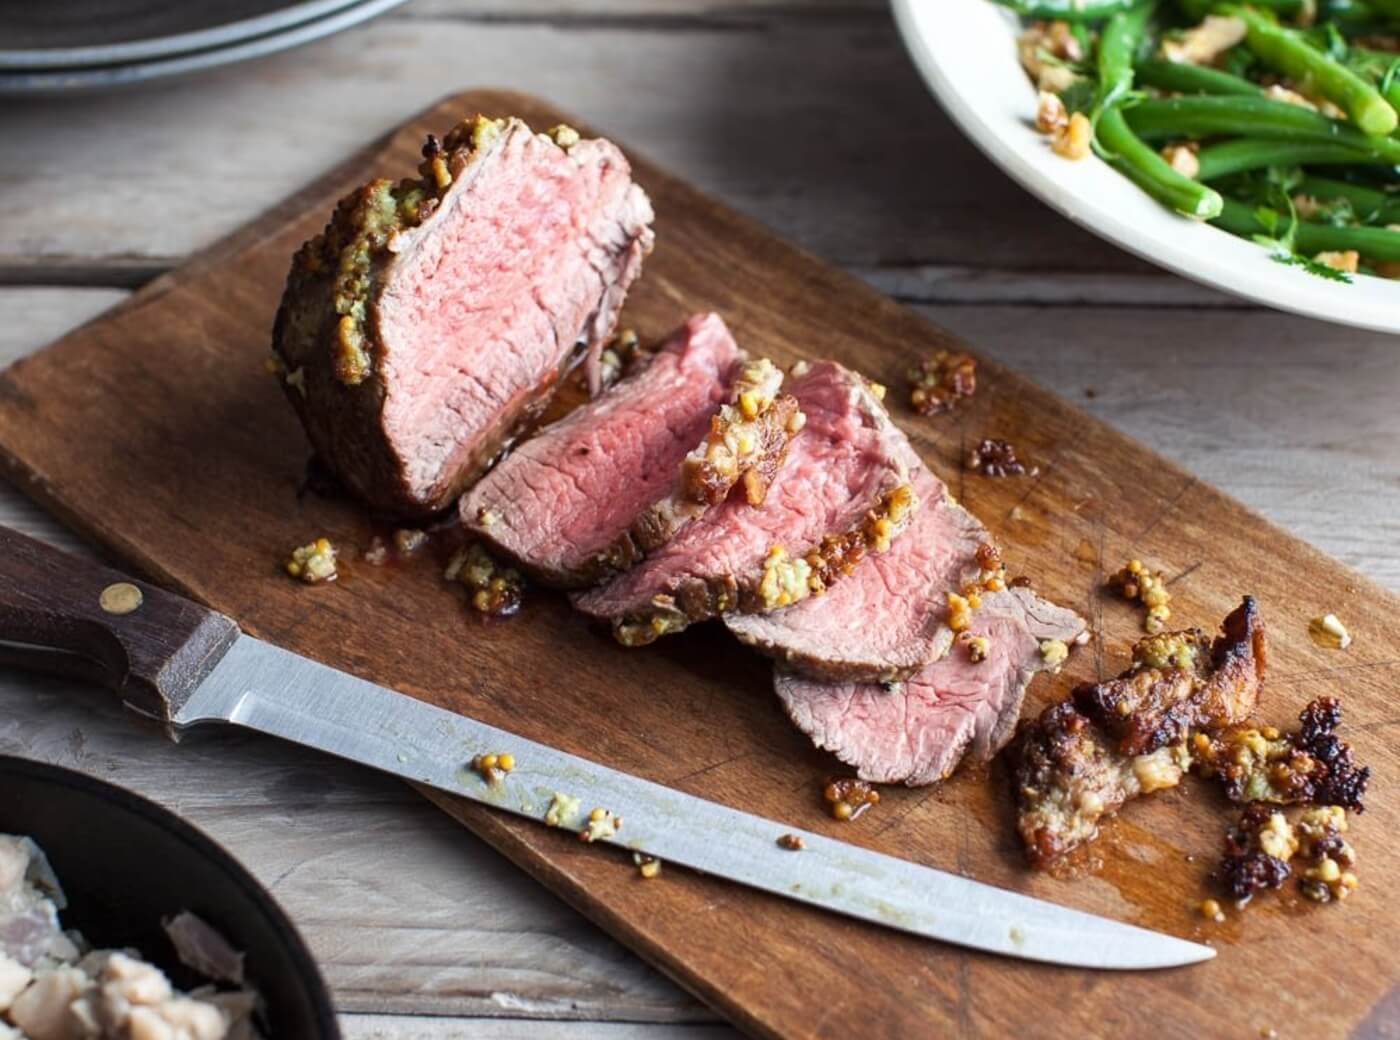 mustard-crusted-roast-beef-with-white-bean-mash-and-walnut-dressed-beans-1400x1040-ecc85ccb6198391883e4ce2cc2ffccef